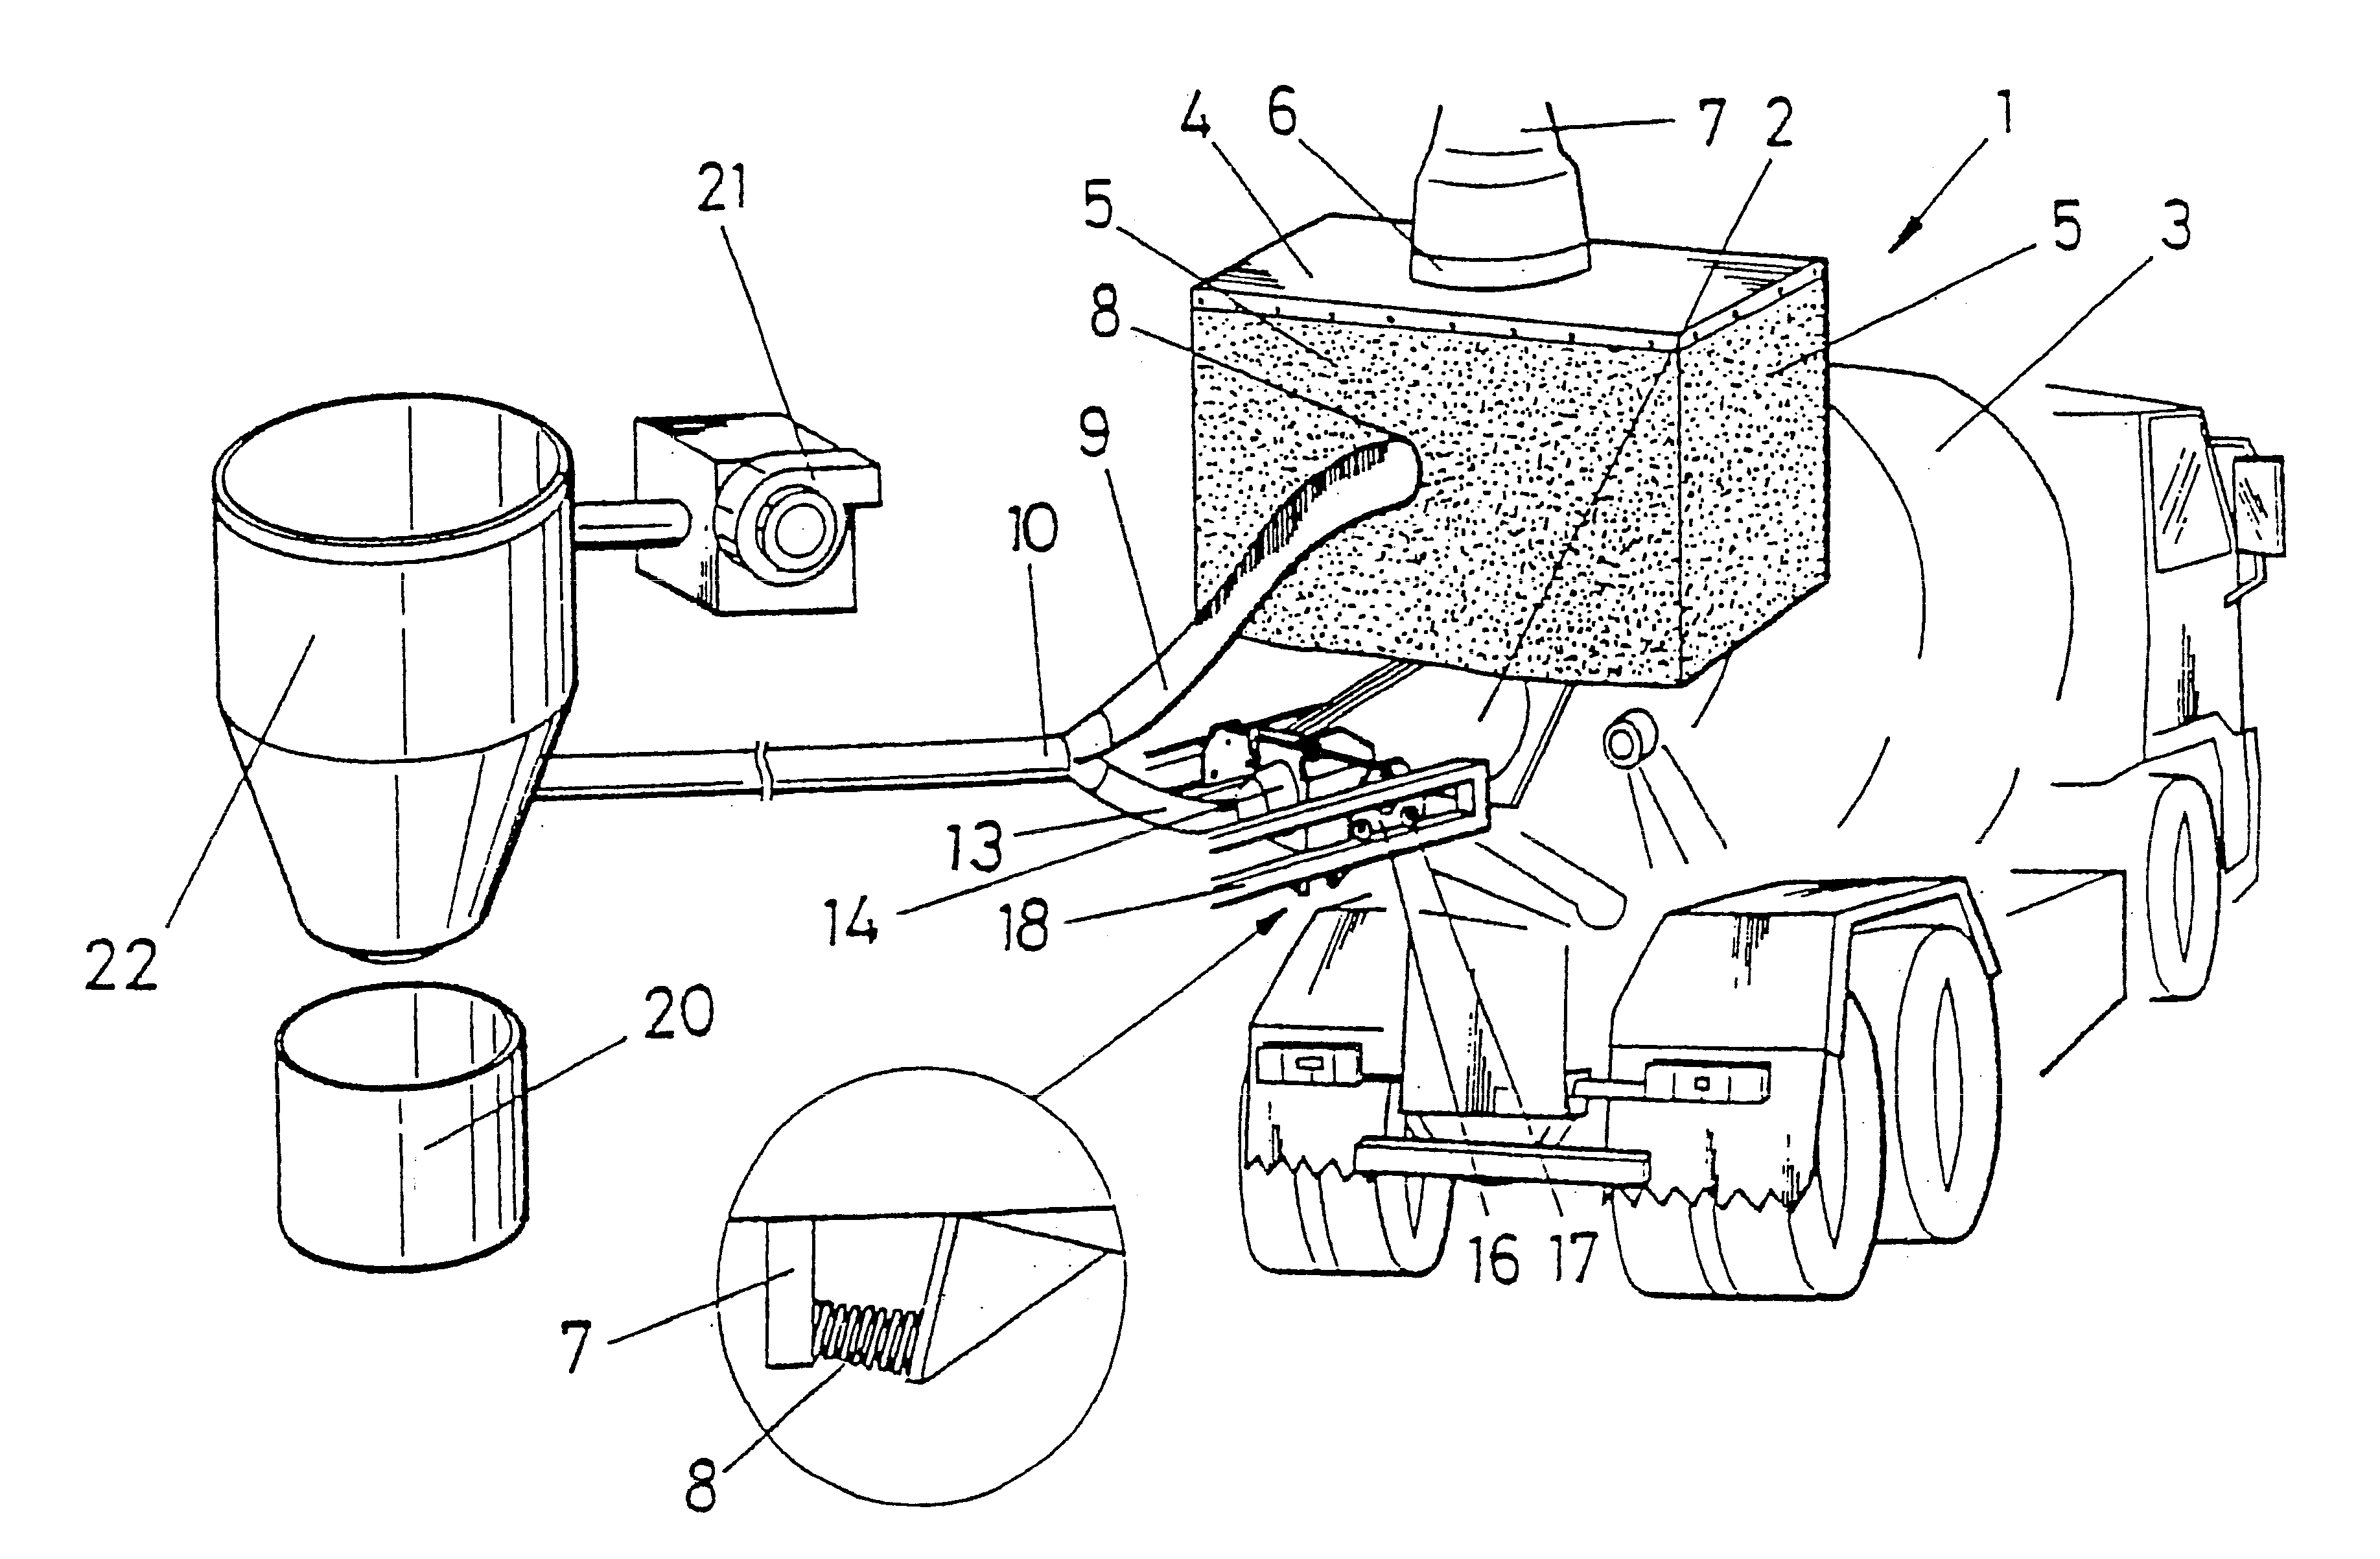 Device for capturing dust in the loading of concrete mixer trucks